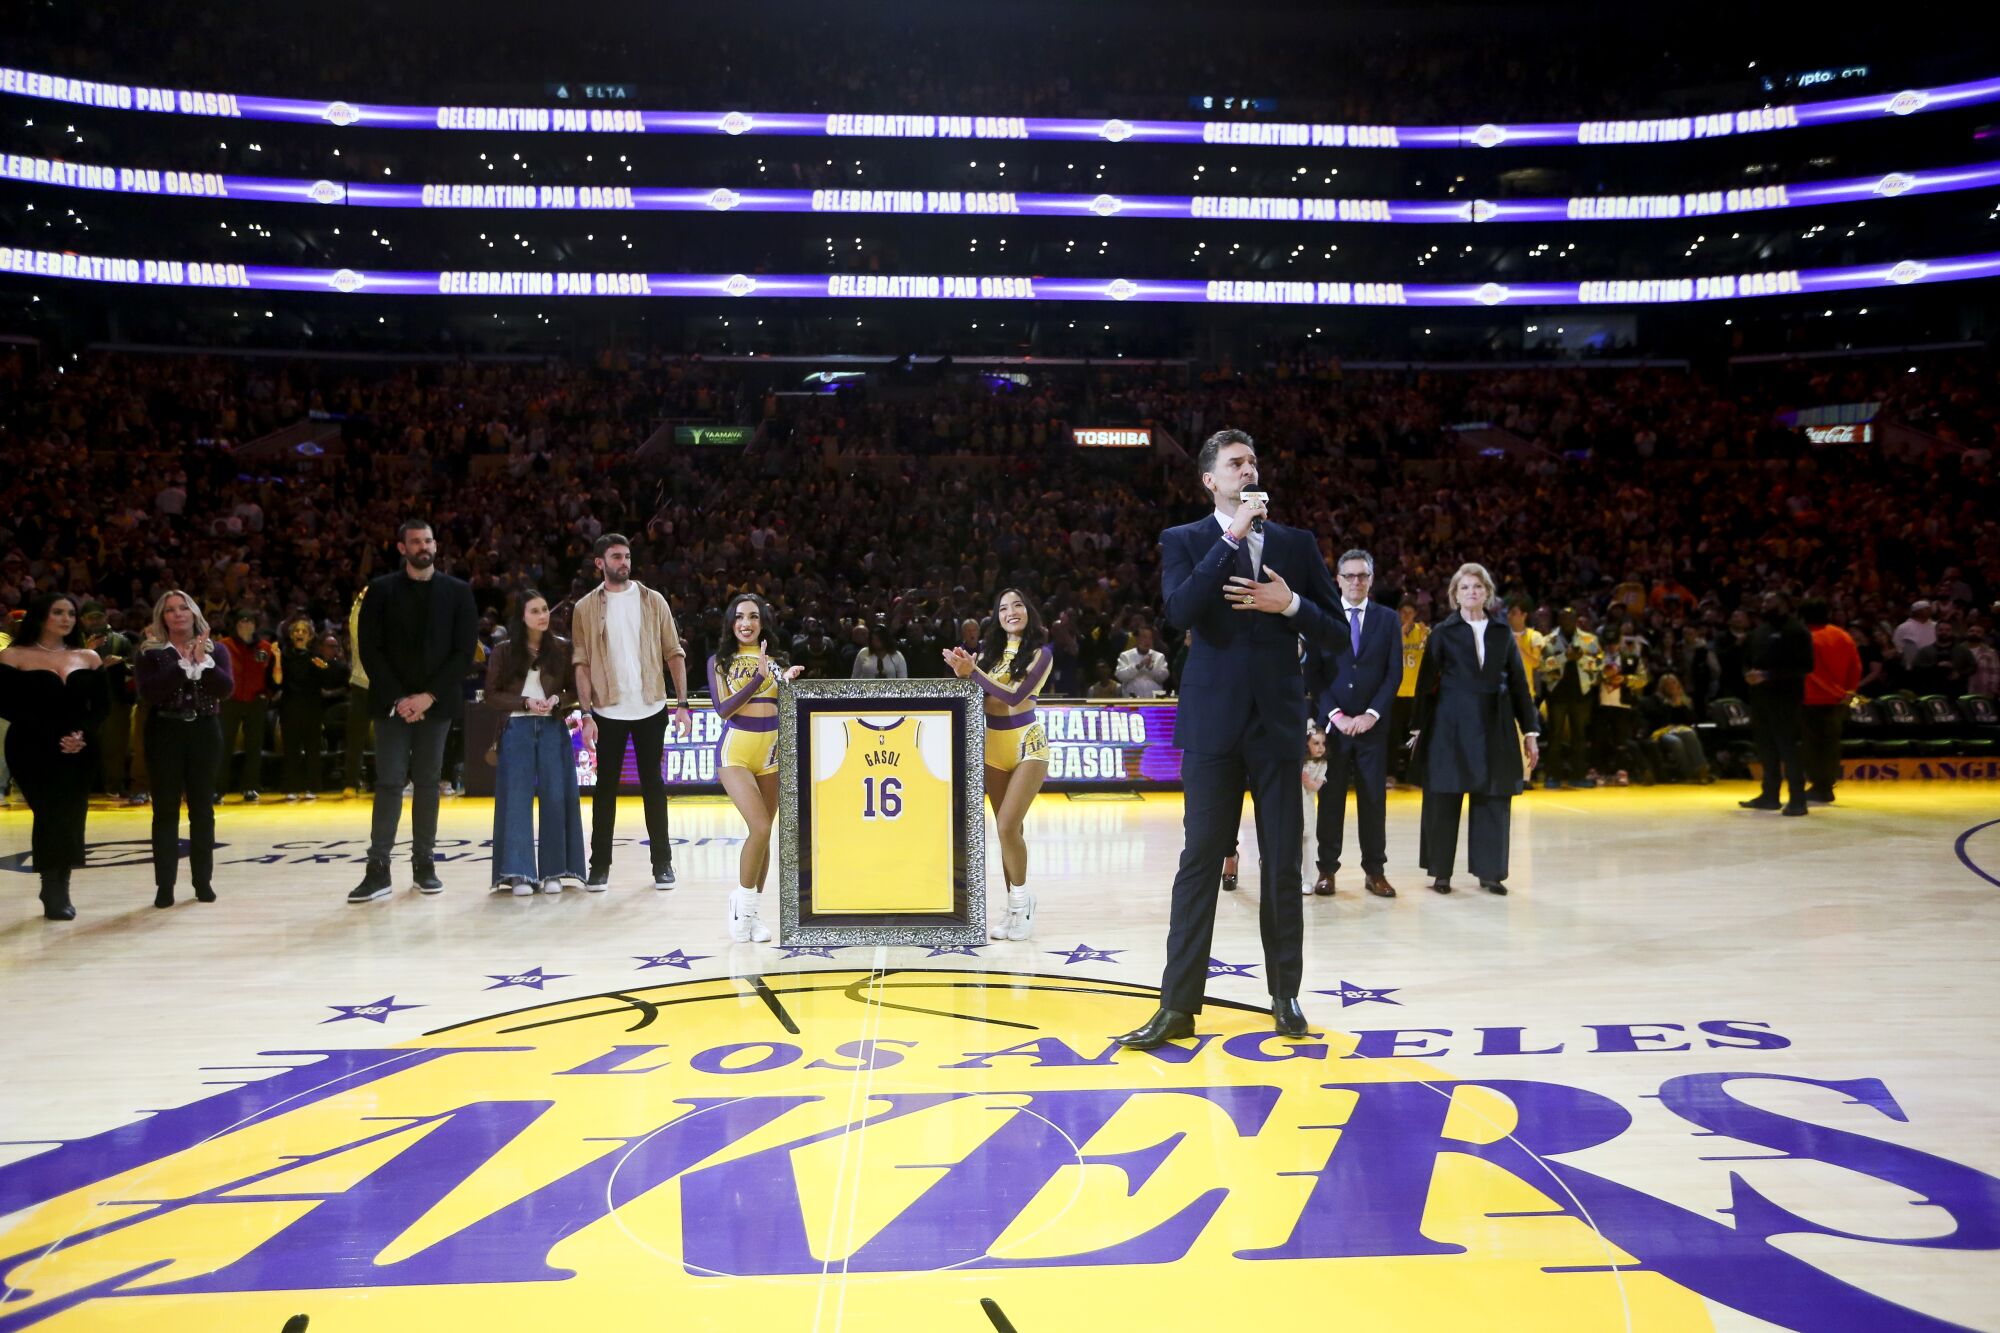 Pau Gasol addresses the Crypto.com Arena crowd during his Lakers jersey retirement ceremony Tuesday.